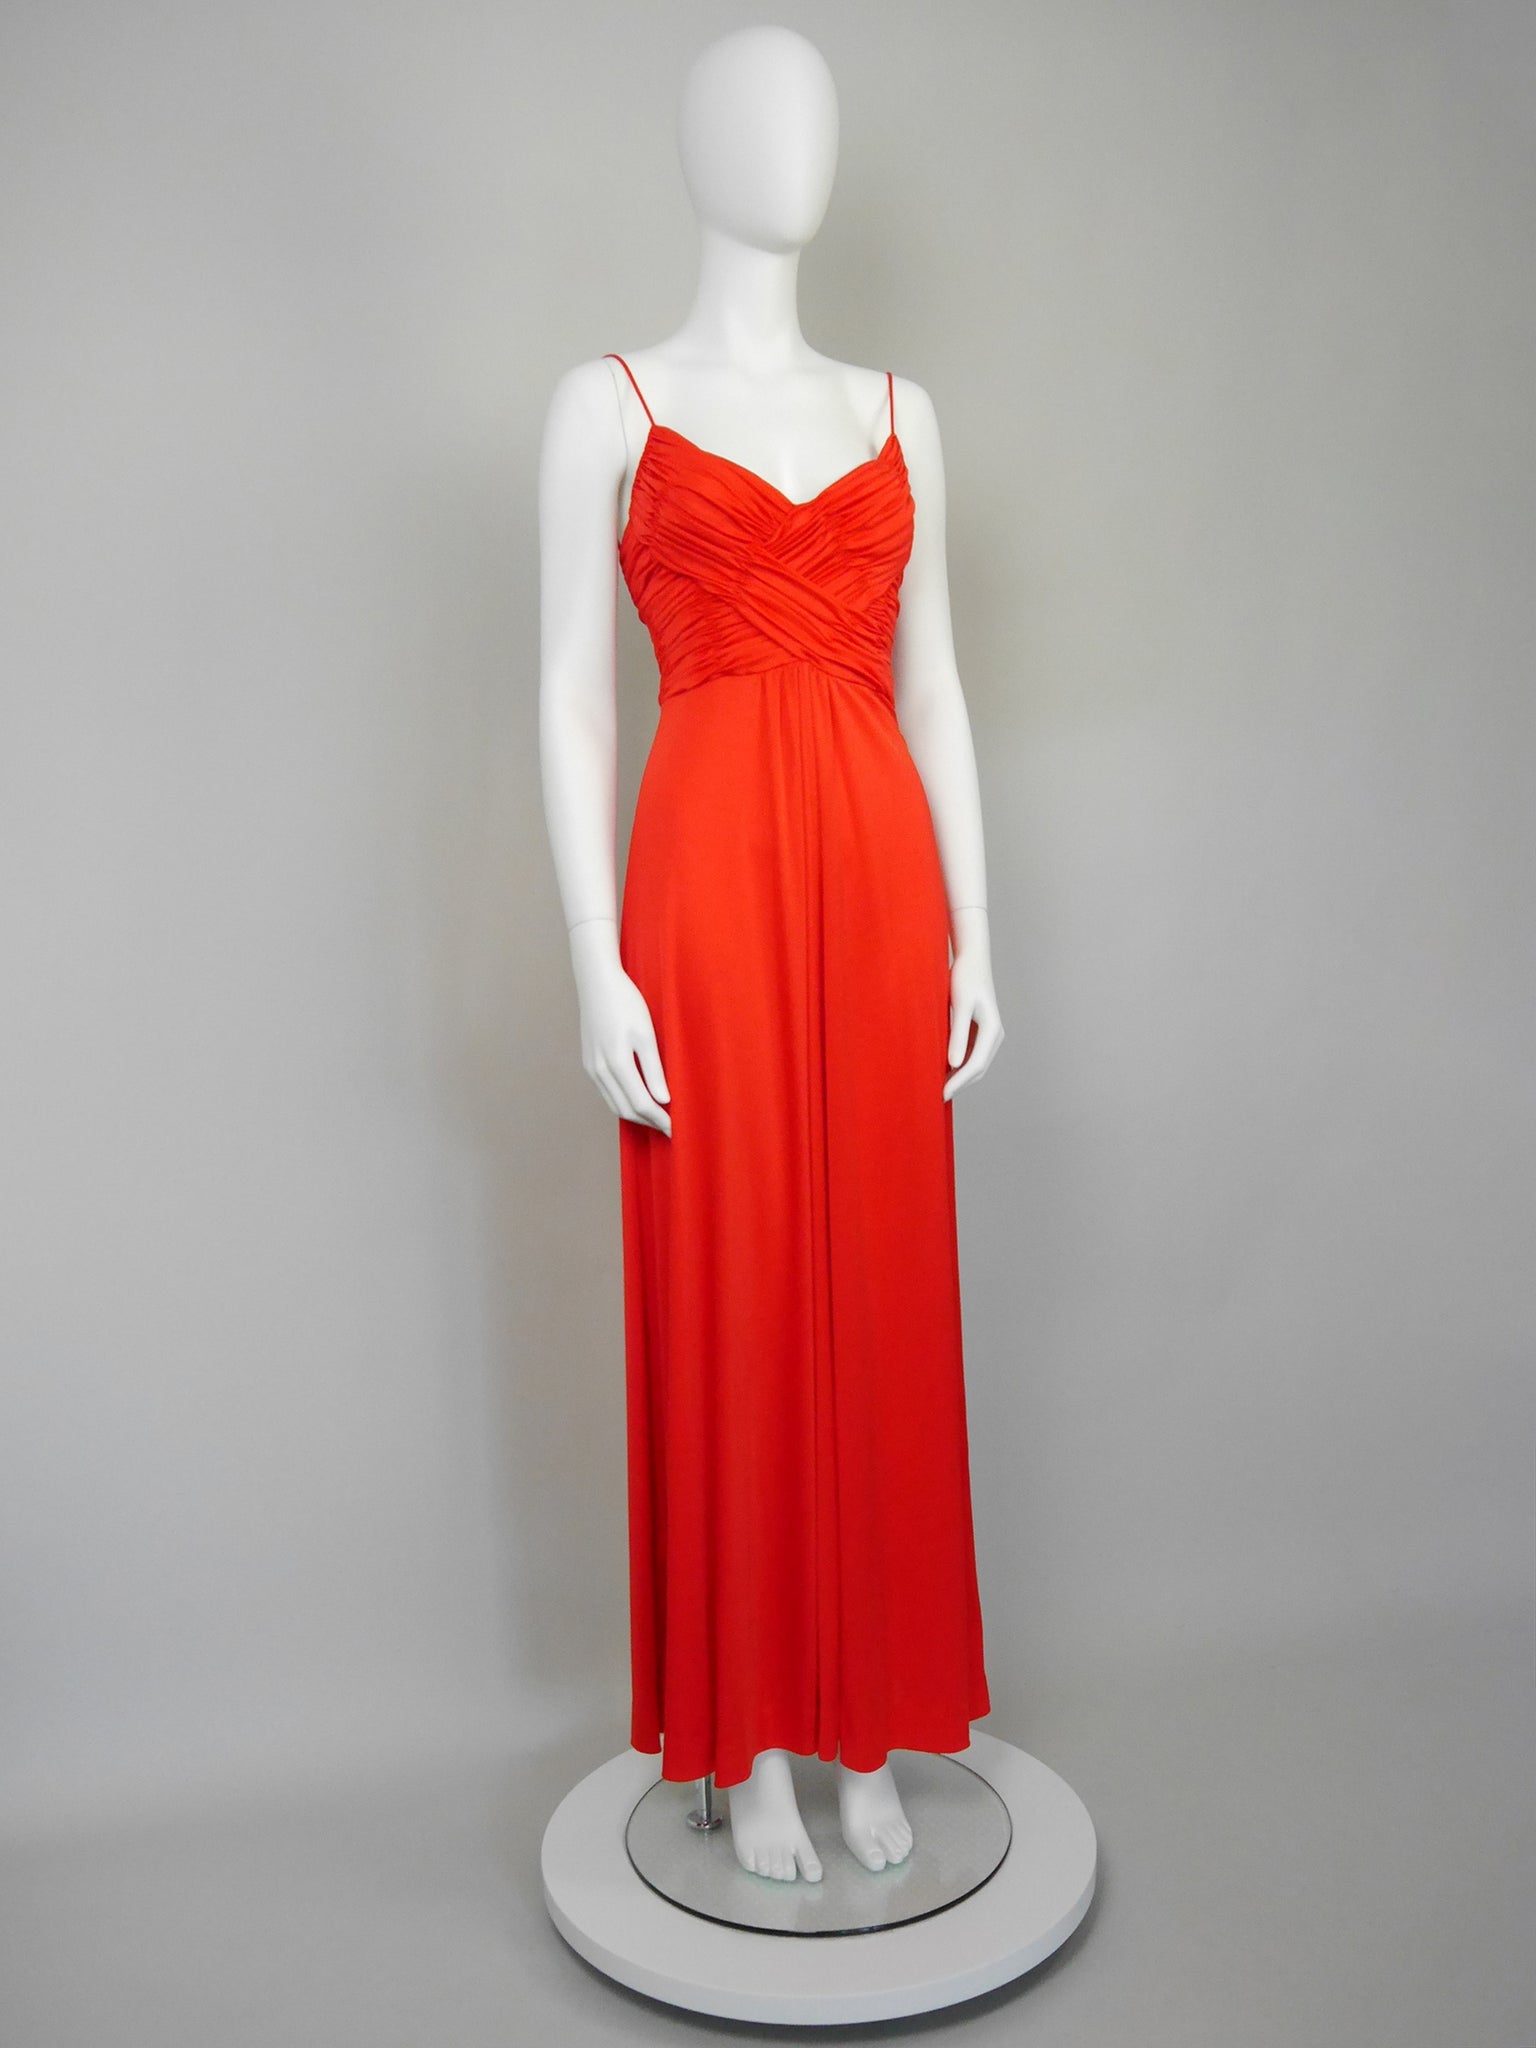 LORIS AZZARO 1970s Vintage Draped Red Jersey Maxi Evening Dress Gown Size XS